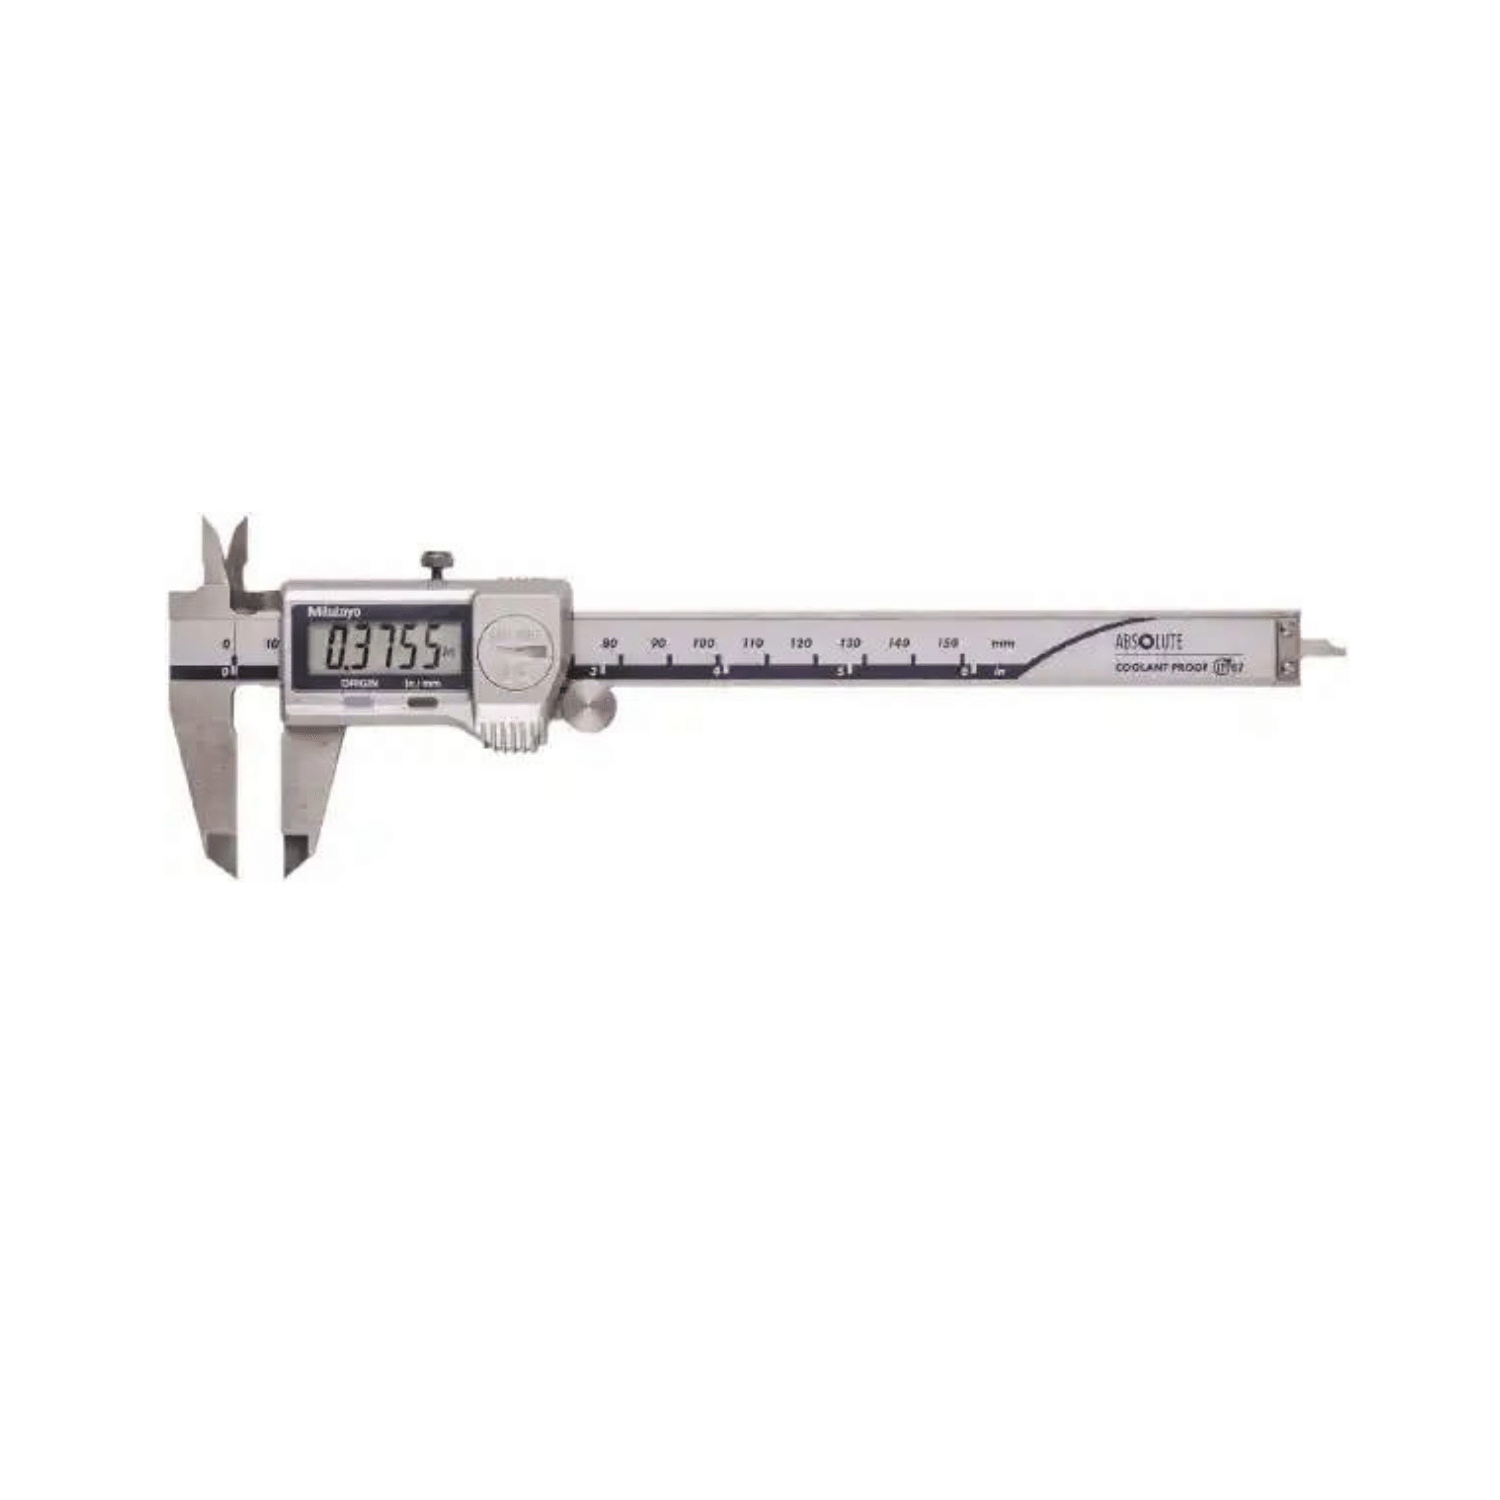 Mitutoyo Absolute Coolant Proof Caliper, 0-6″/0-150mm Measuring Range, 500-752-20